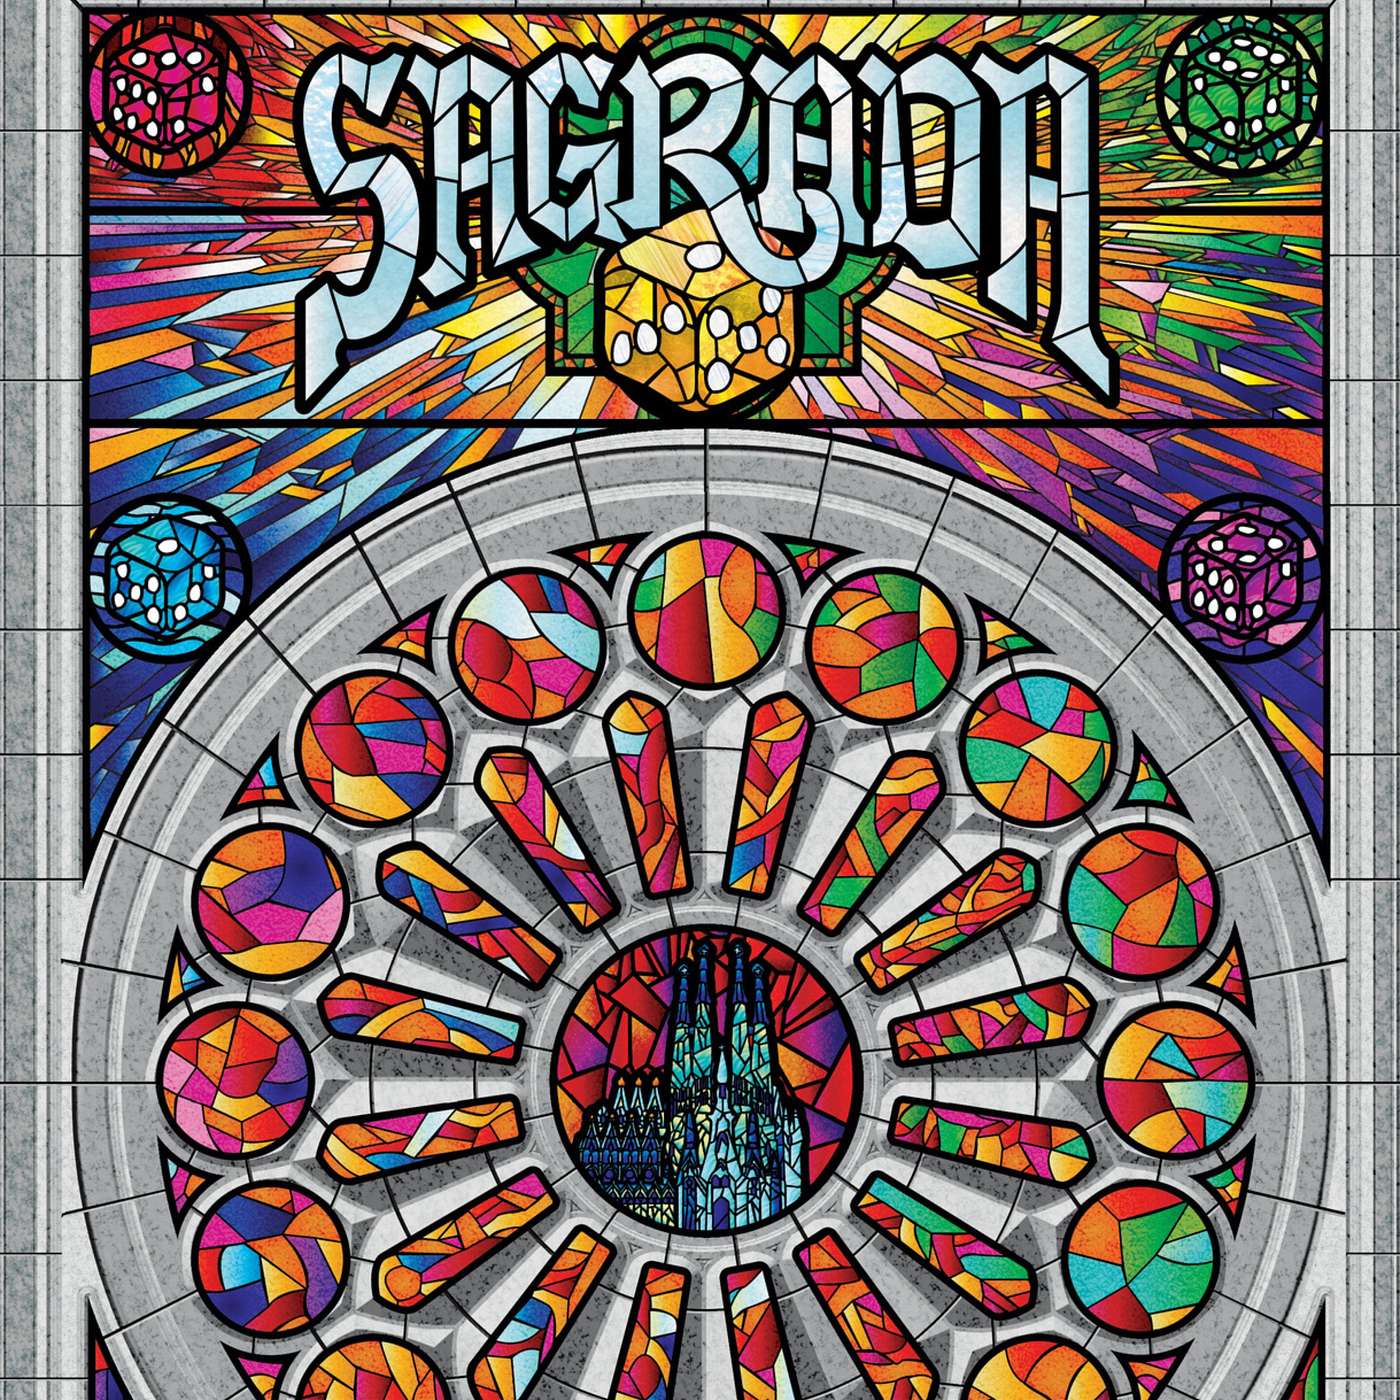 Sagrada – A Two Top Review